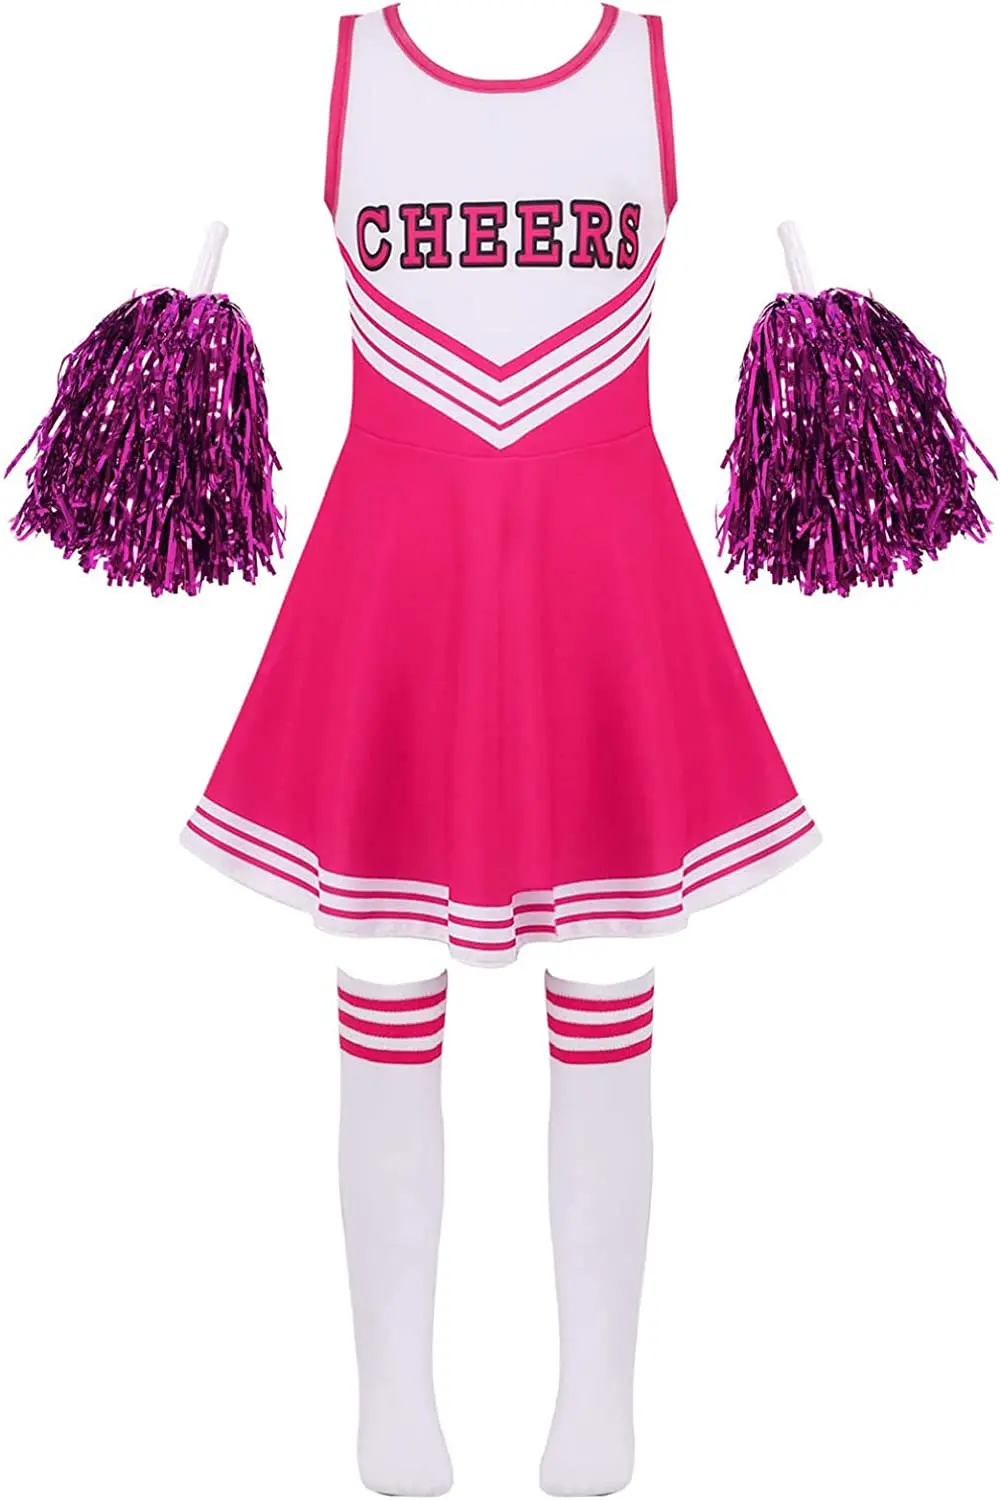 girls-cheerleading-dance-dress-cheer-leader-outfits-uniform-halloween-cosplay-complete-costume-with-pompoms-and-sock